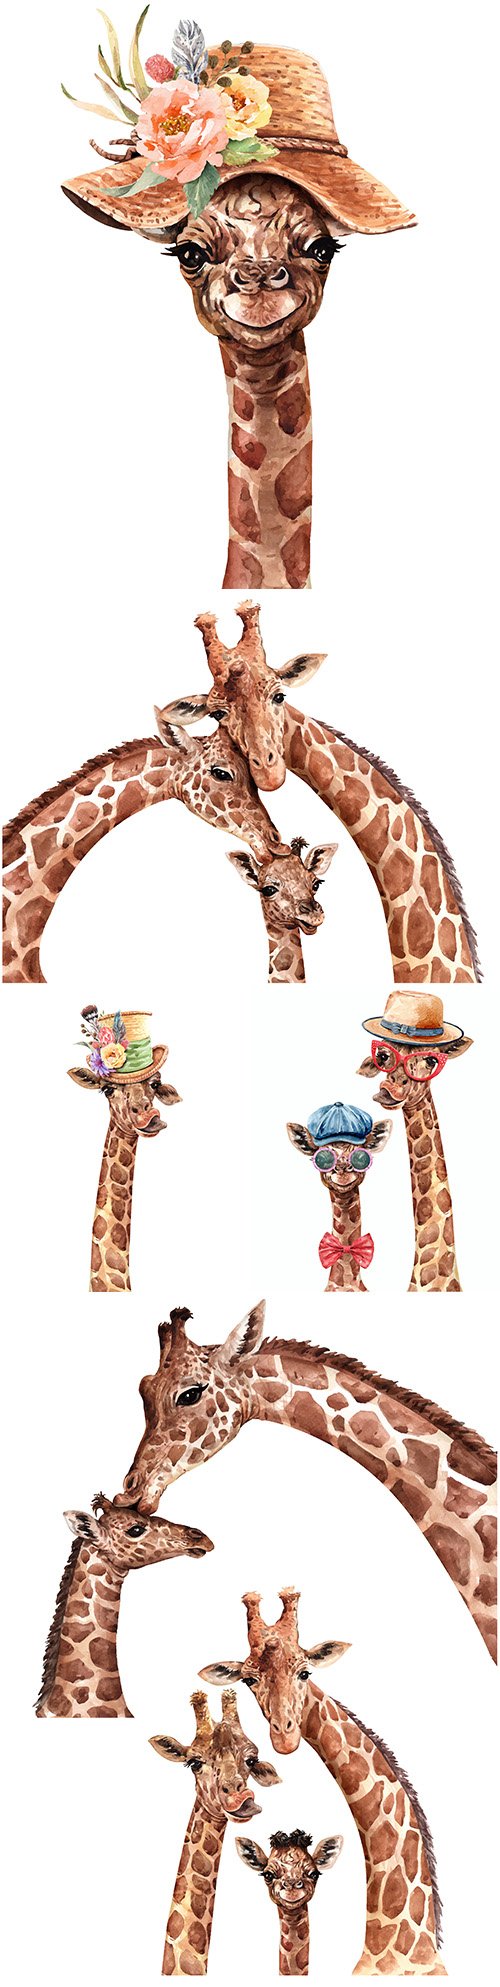 Giraffe in hat with flower and family watercolor illustration